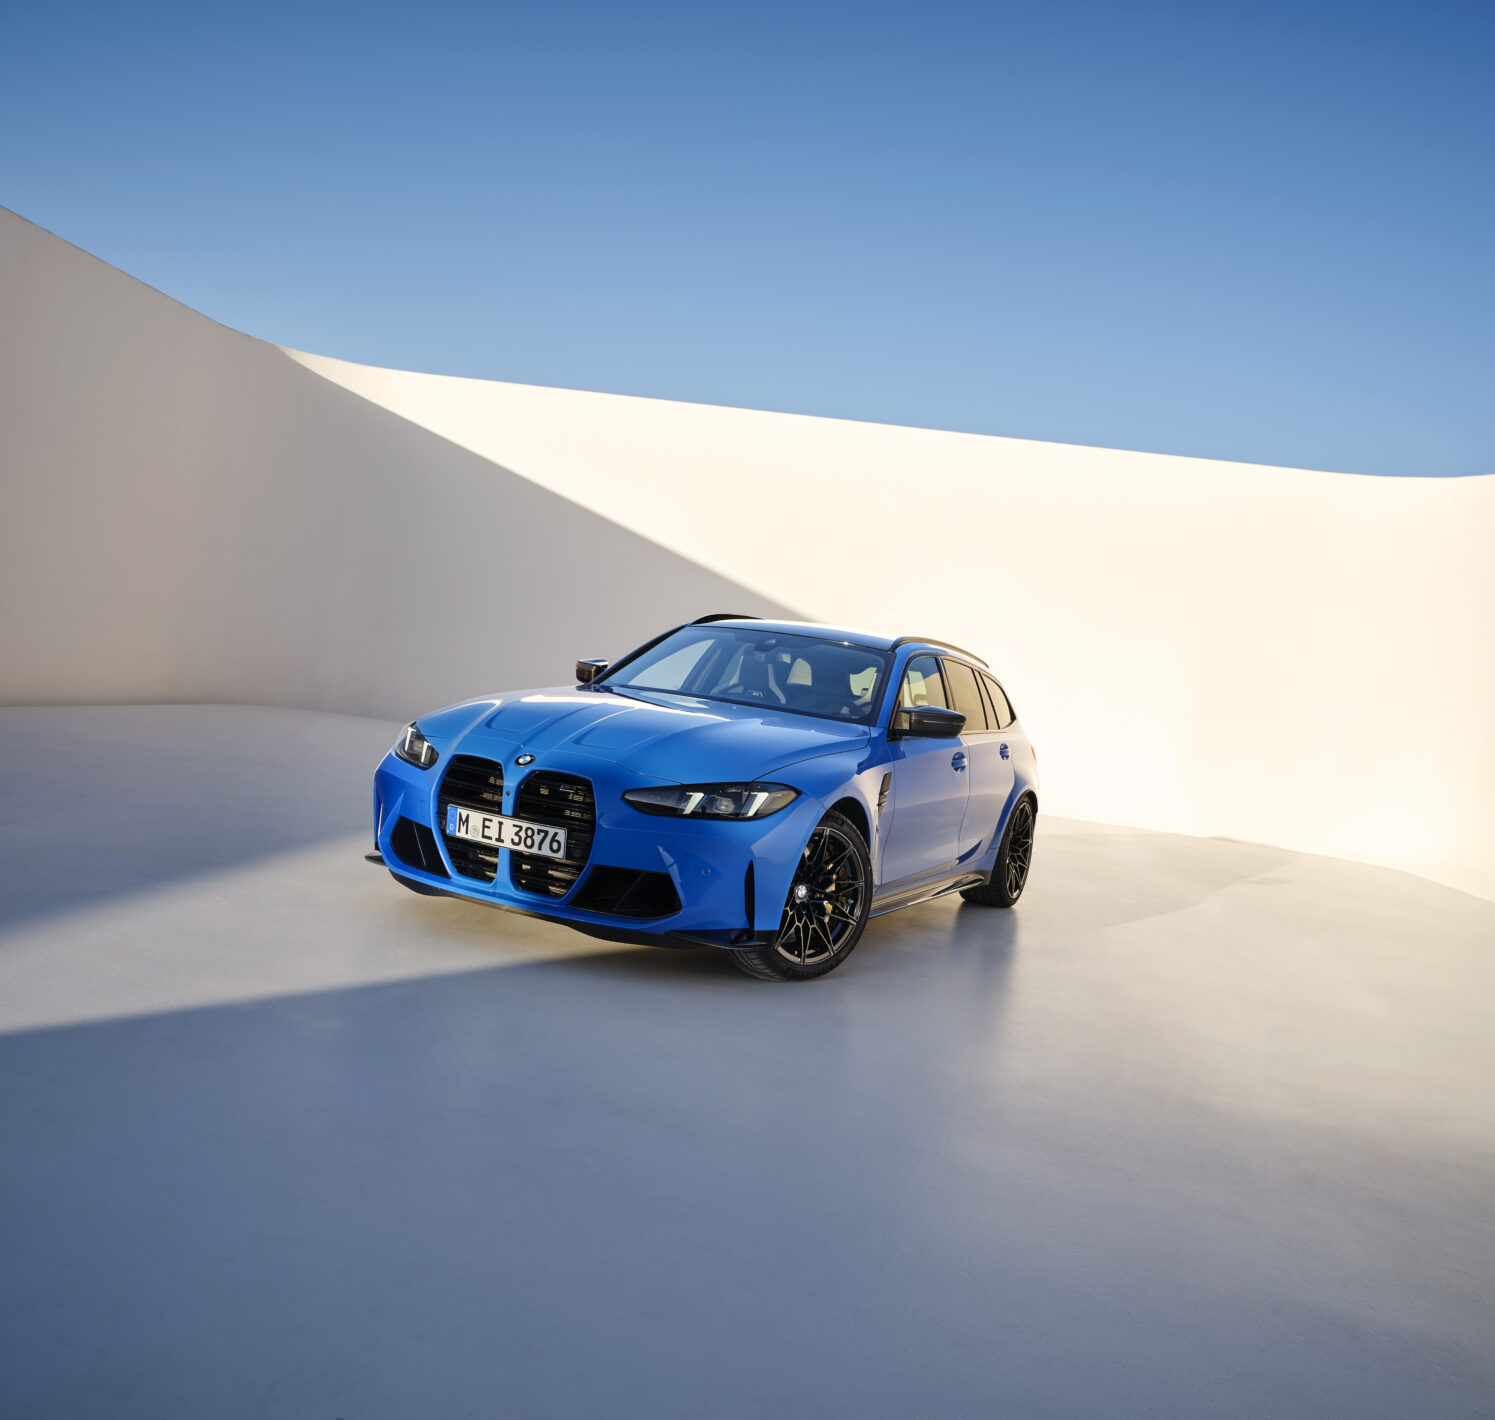 https://autofilter.sk/assets/images/m3-touring/gallery/P90551048_highRes_the-new-bmw-m3-touri.jpg - obrazok